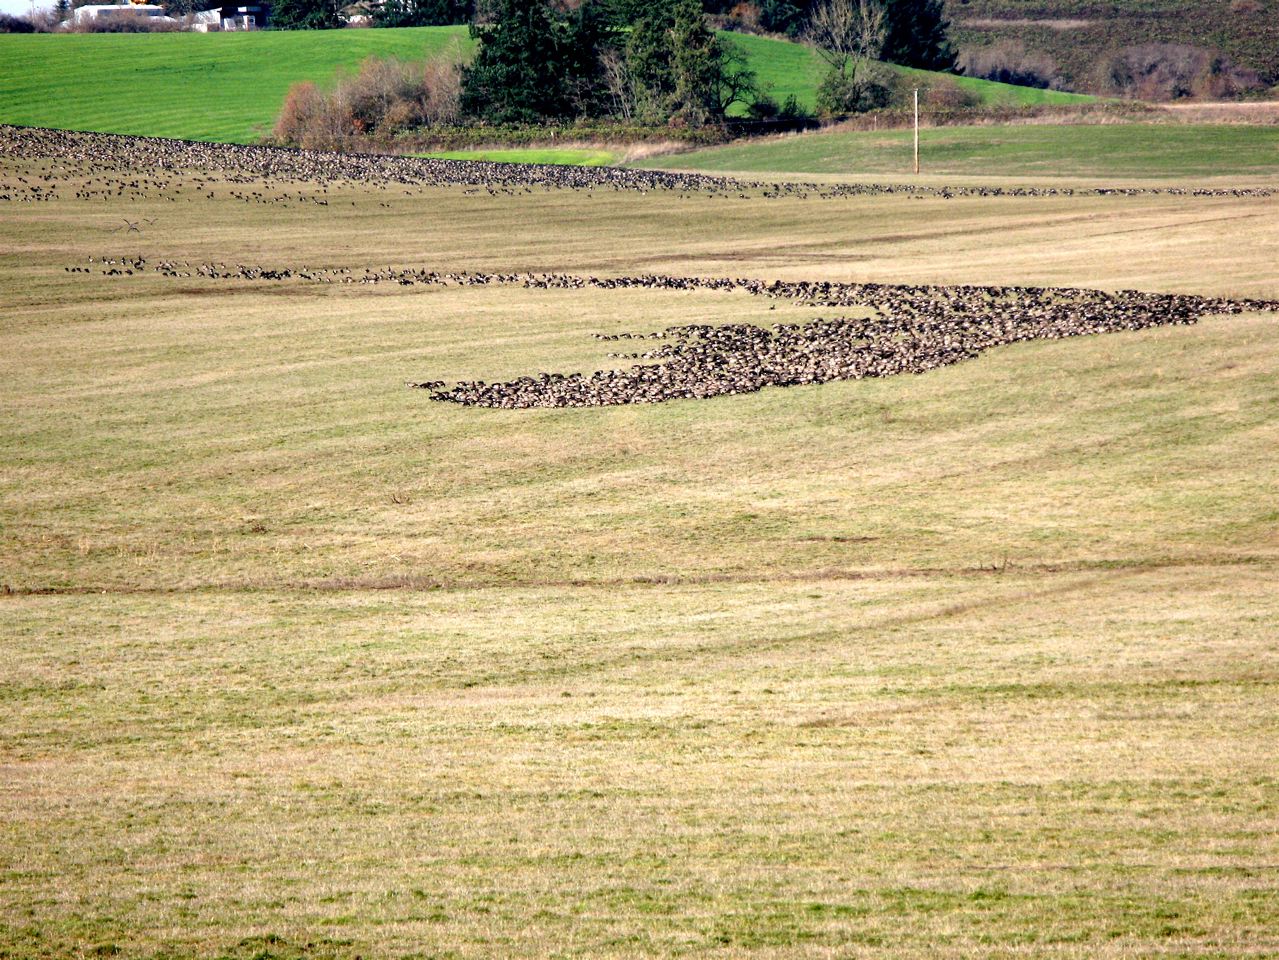 [thousand+geese]